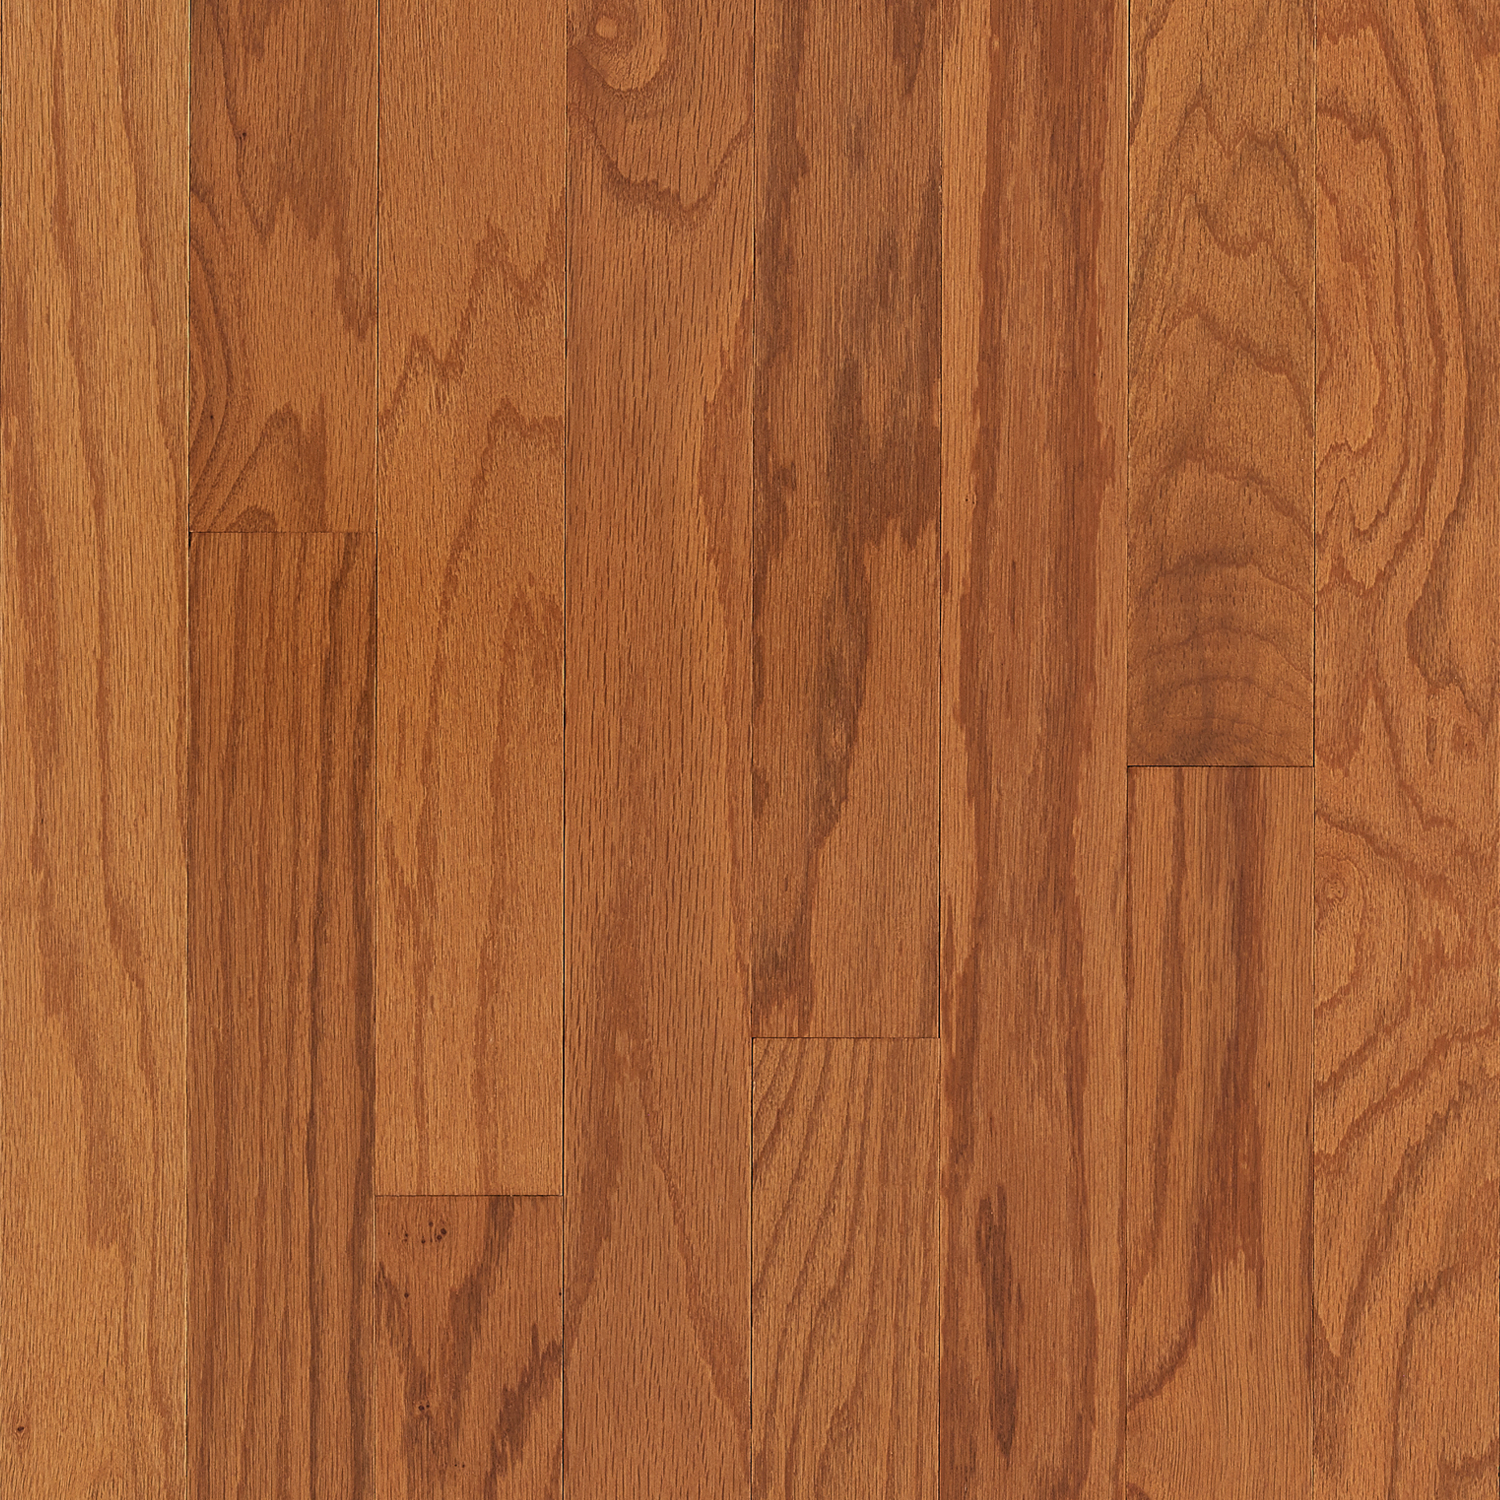 Springdale Plank Erscotch 3 In Red, How To Clean Bruce Engineered Hardwood Floors